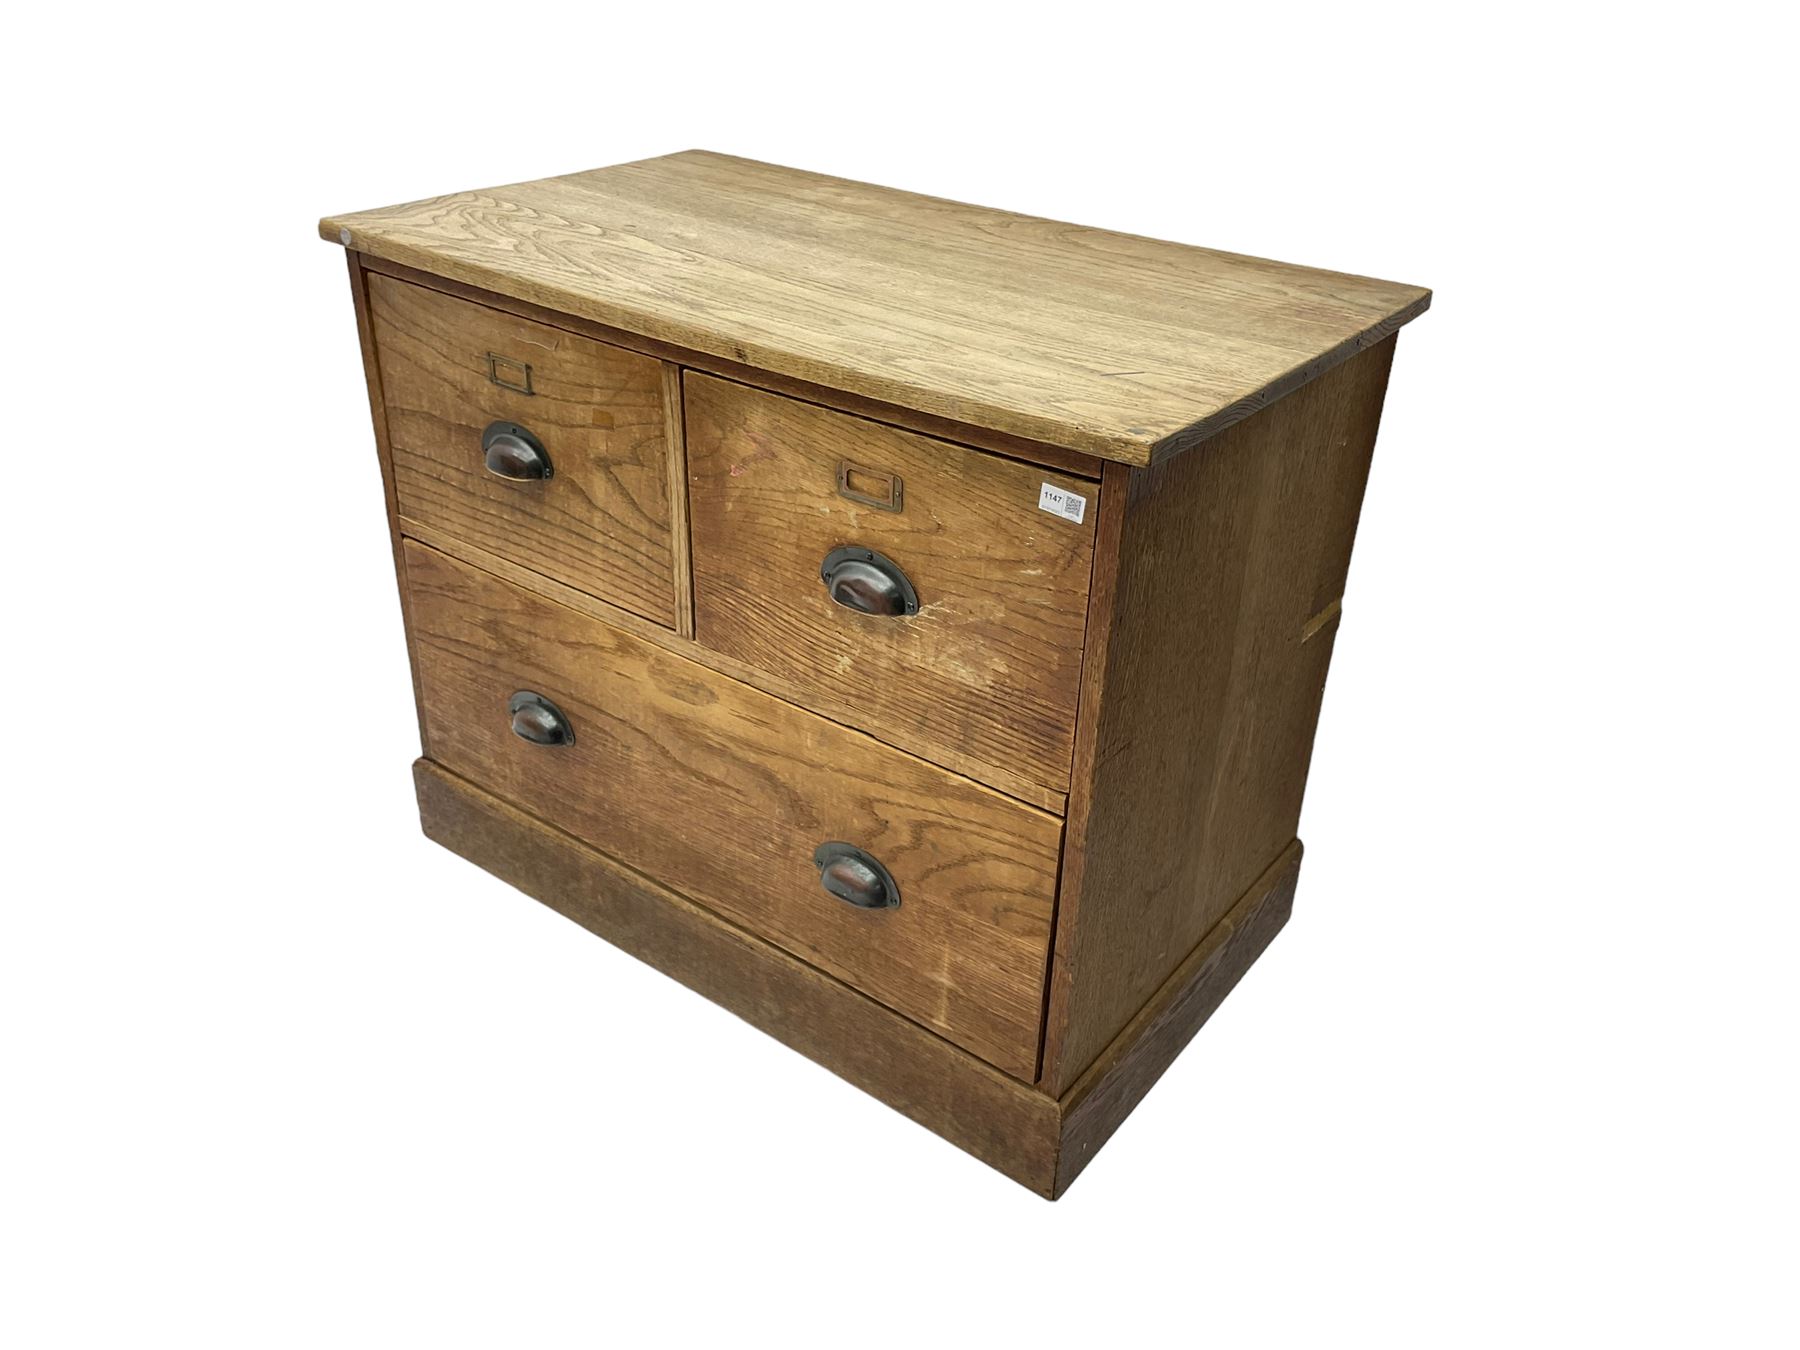 Early to mid-20th century oak chest - Image 4 of 6